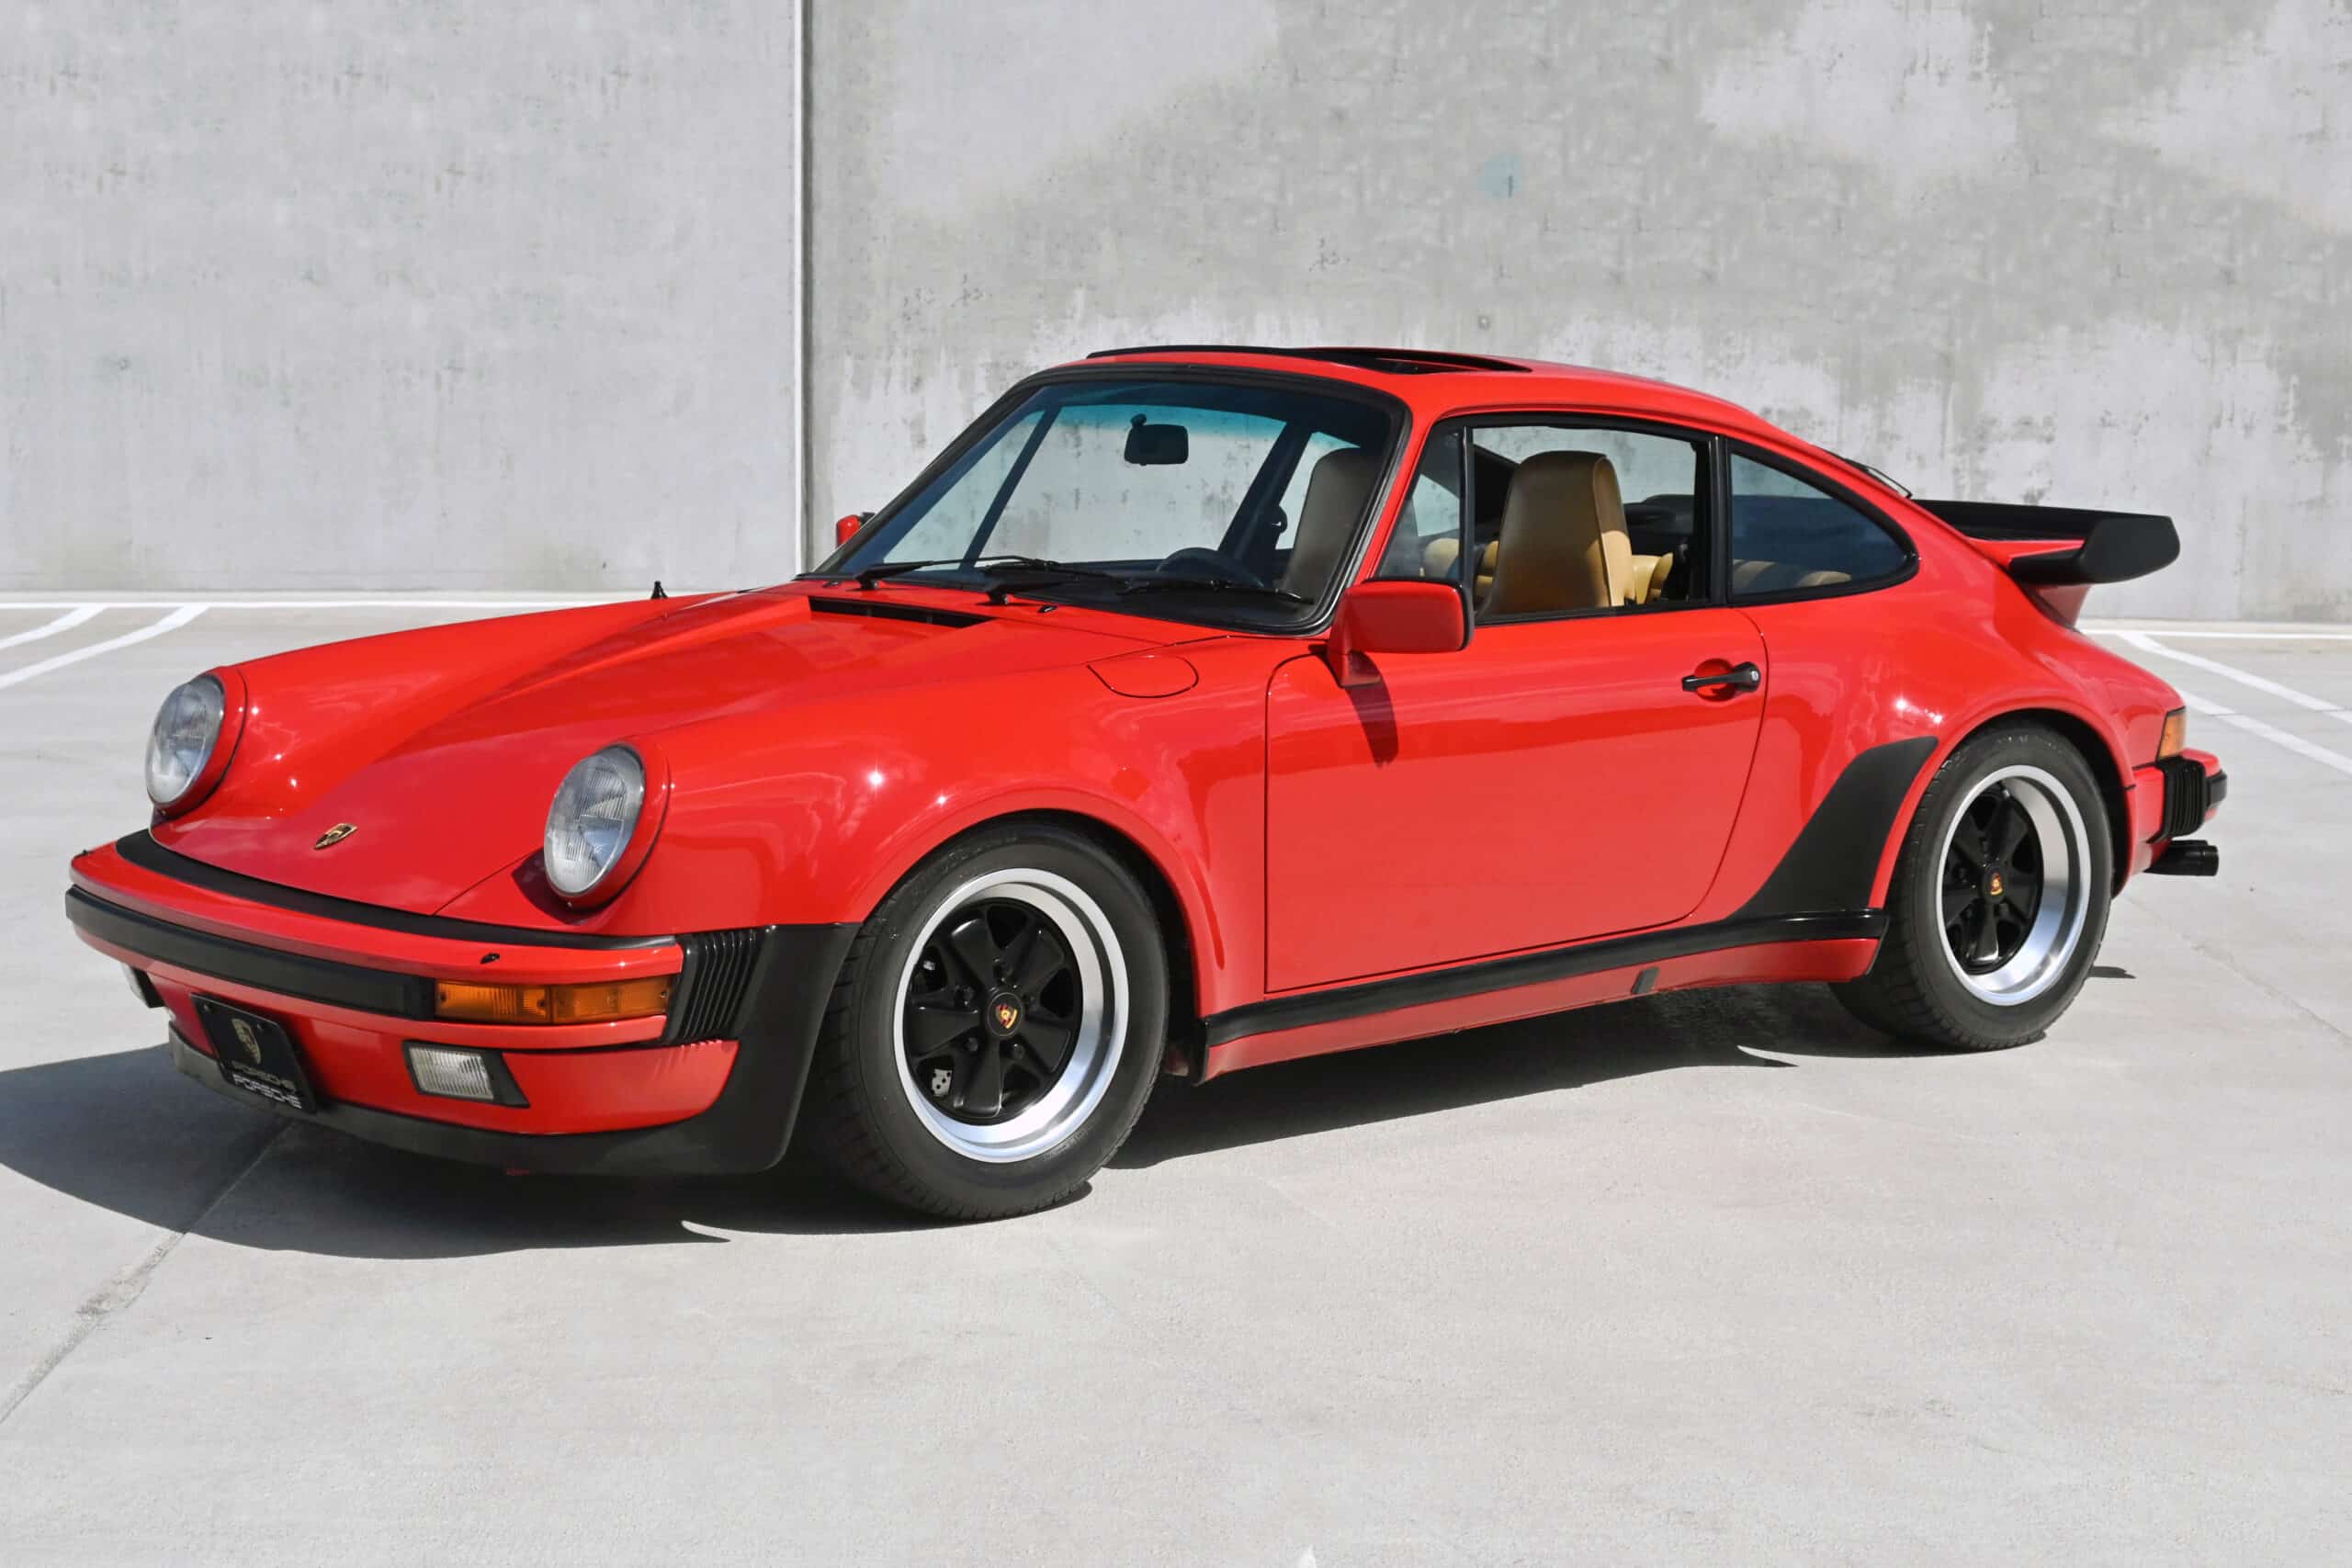 1986 Porsche 930 Red /Champagne Unmodified / 46K Actual Miles / Meticulous Ownership for 27 Years / Factory Sport Seats & LSD / Outstanding Condition / Dealer serviced